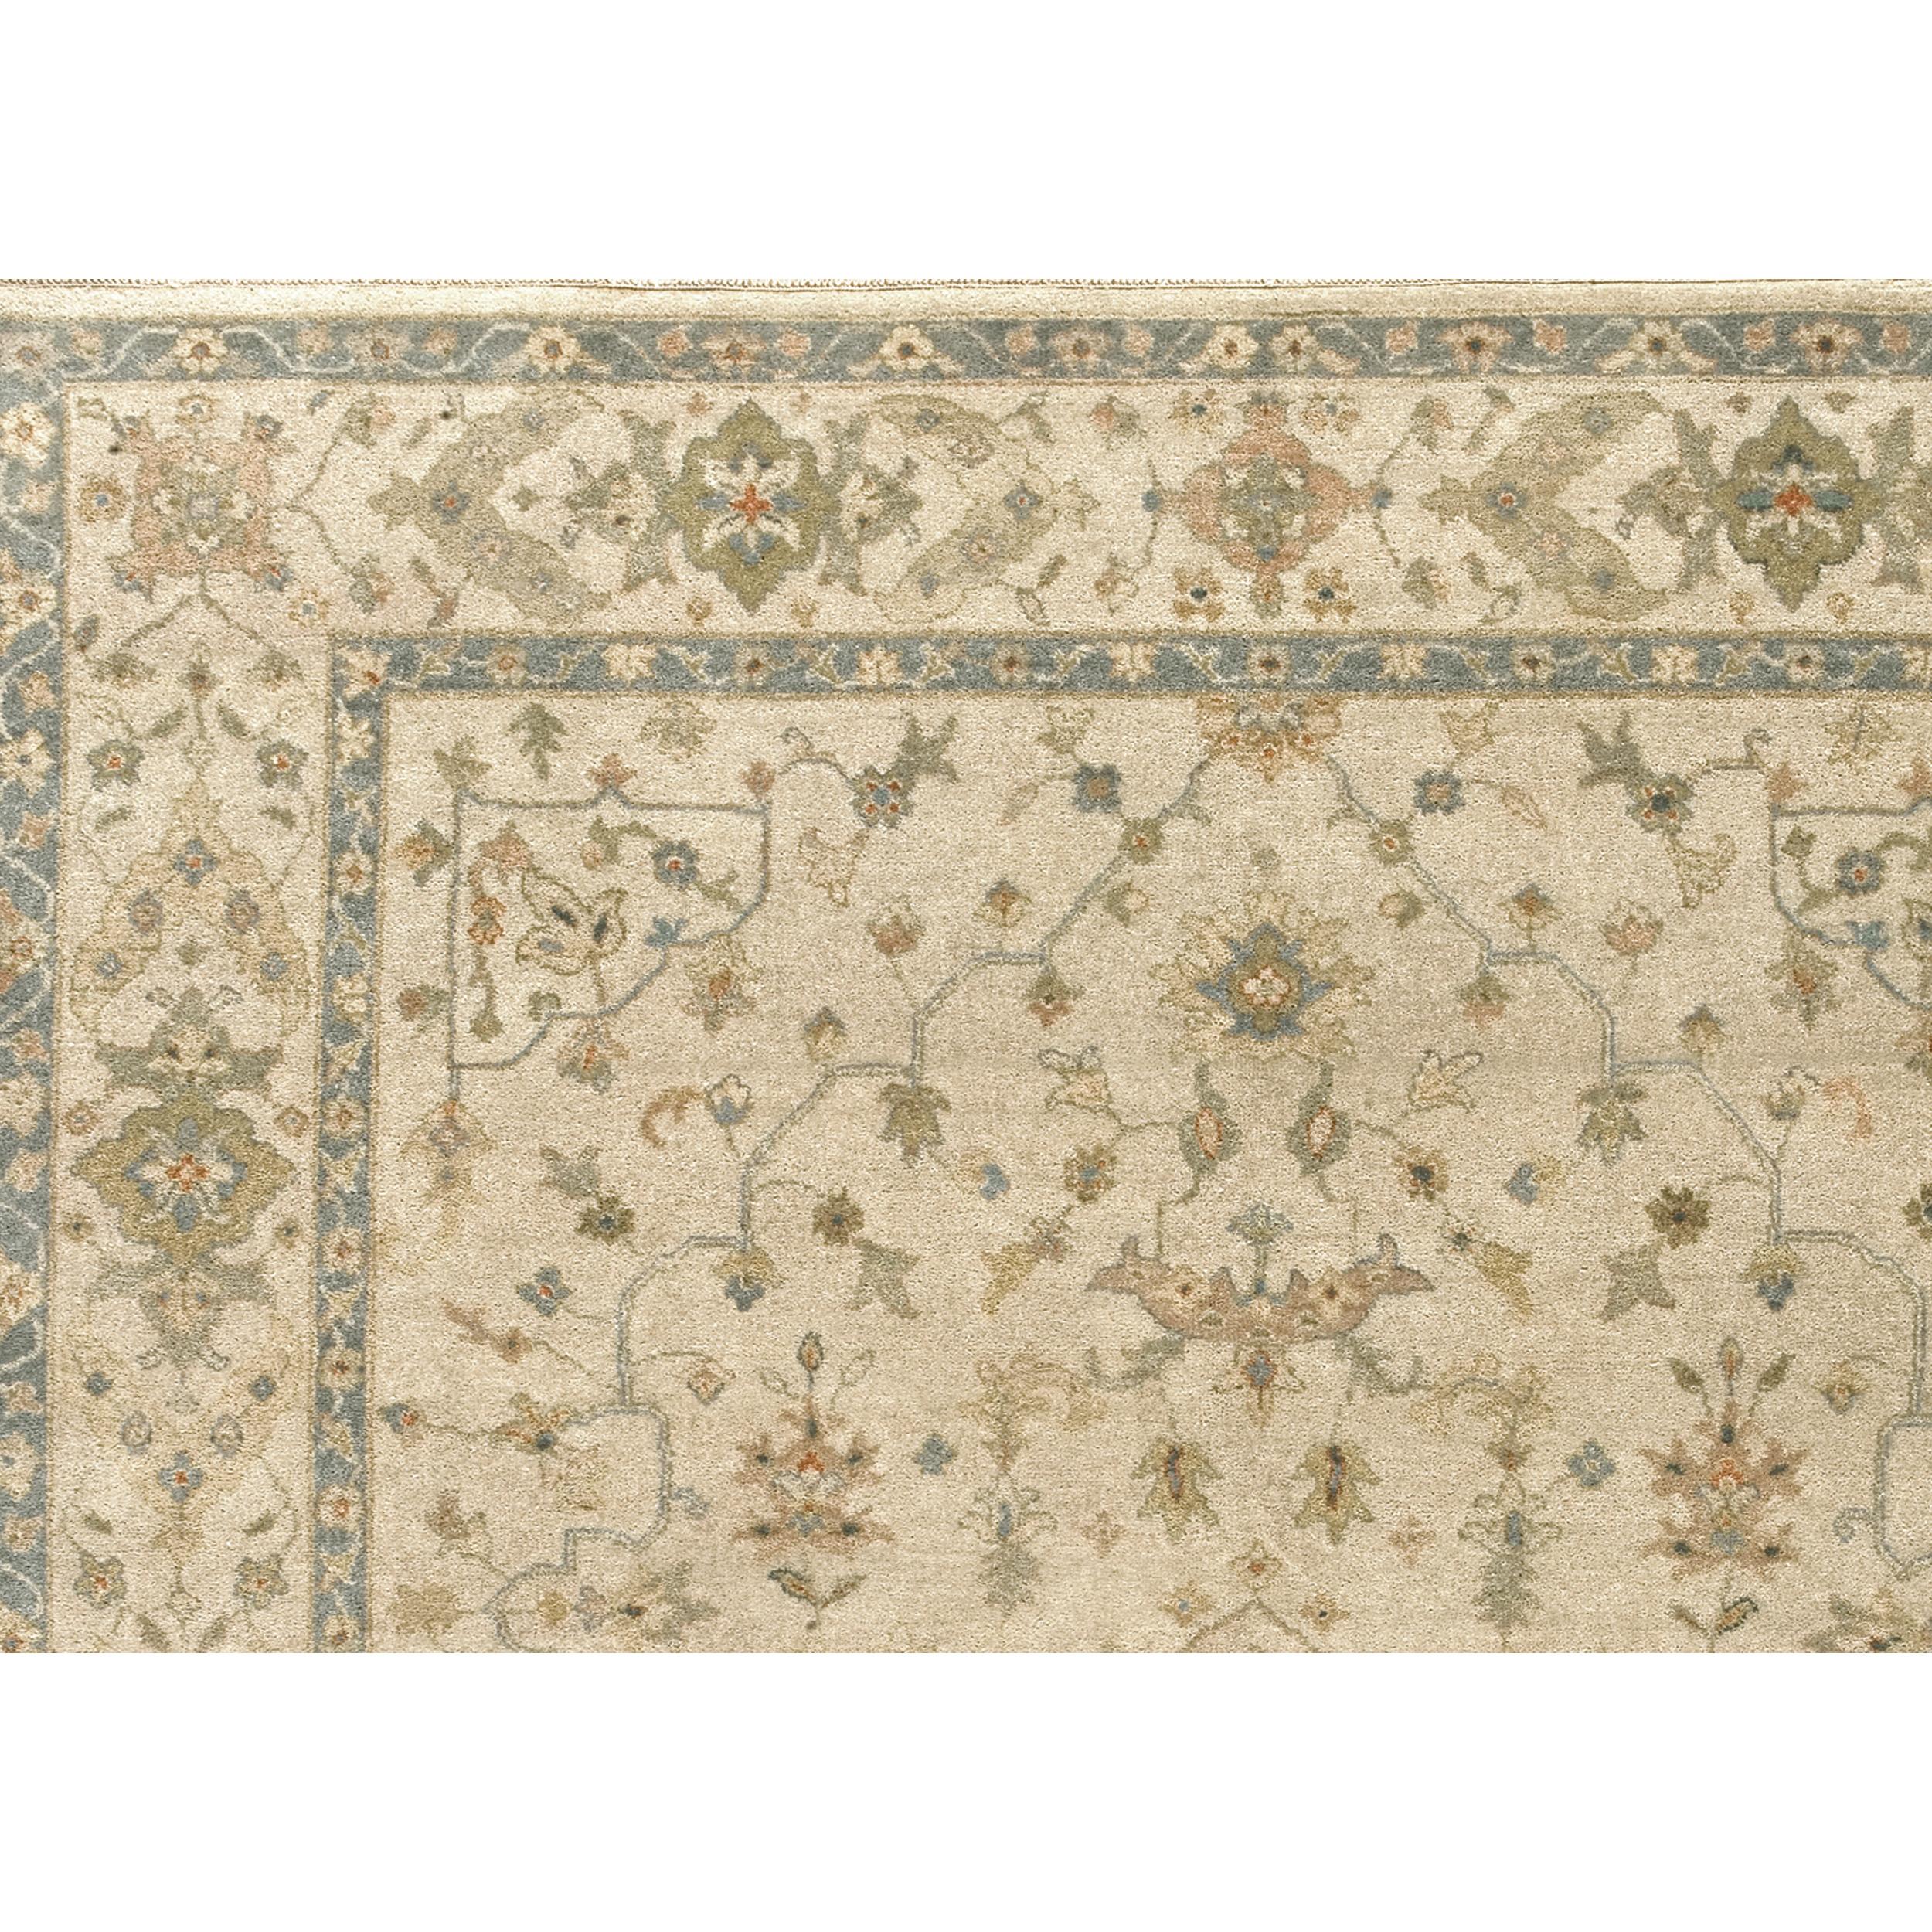 Luxury Traditional Hand-Knotted Herati Beige 12x22 Rug In New Condition For Sale In Secaucus, NJ